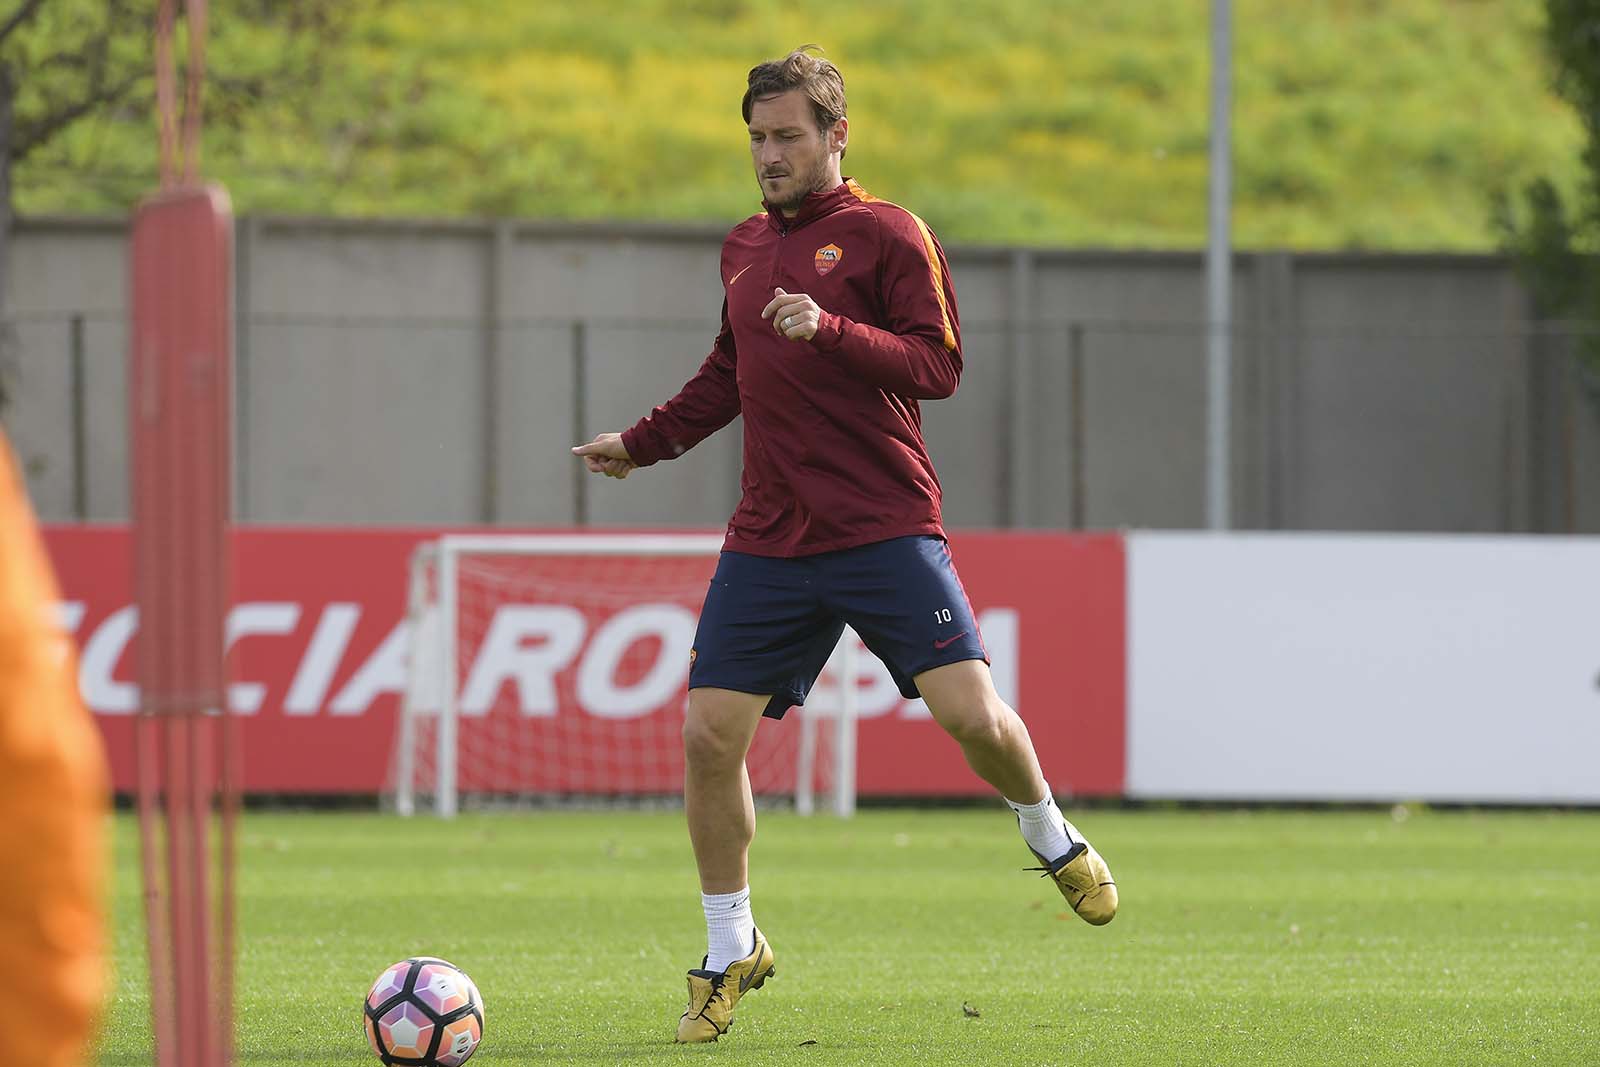 totti-trains-in-nike-tiempo-x-totti-boots-with-exclusive-detail%2B%25287%2529.jpg